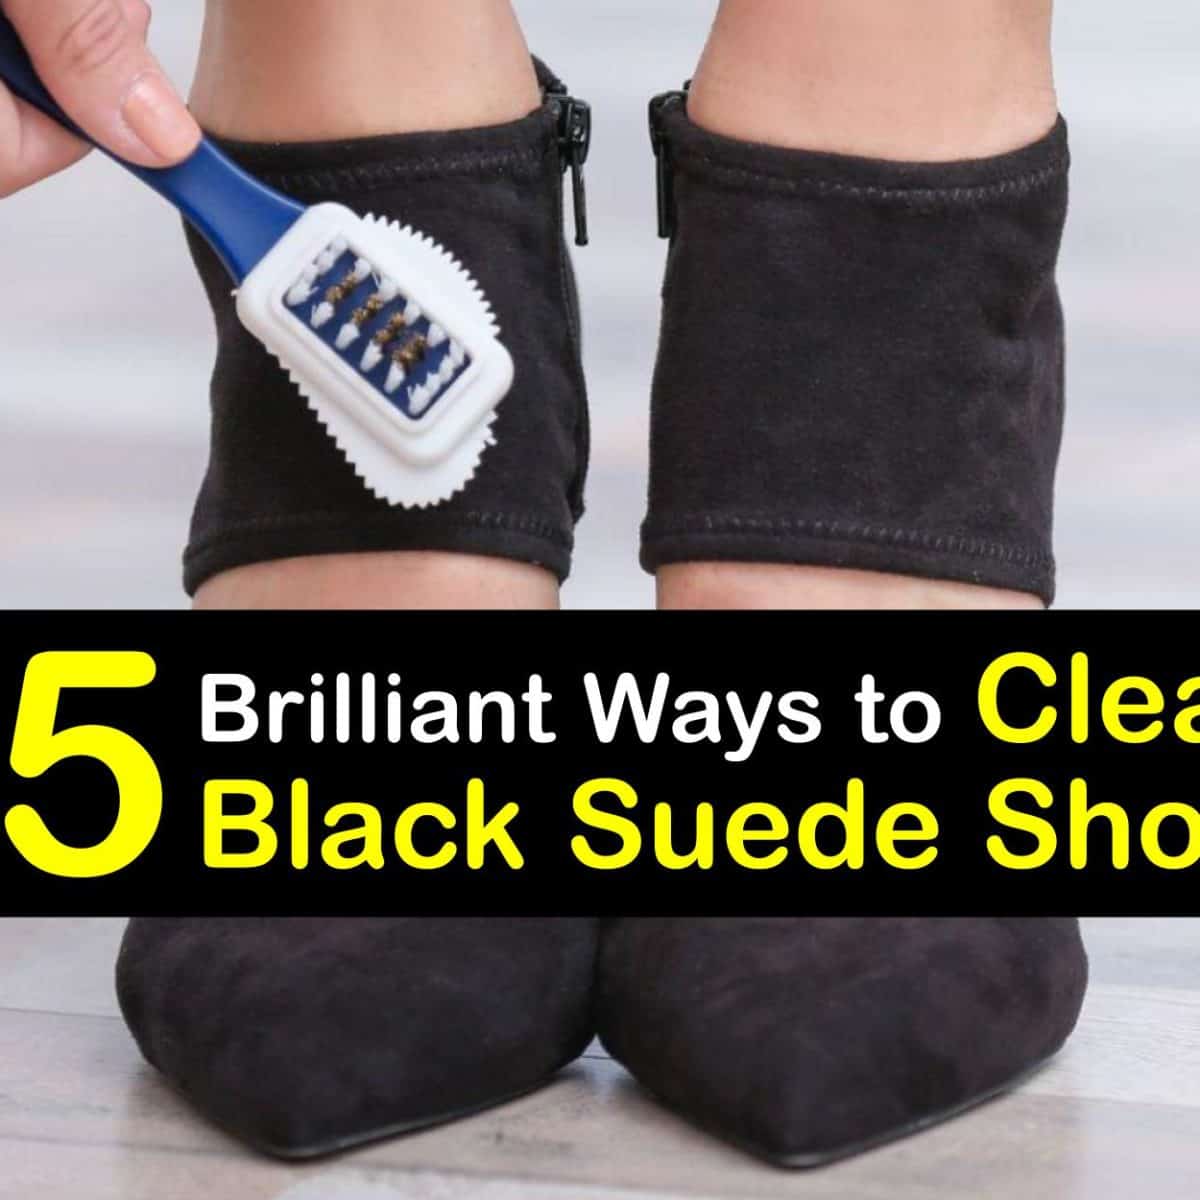 Cleaning Black Suede Sneakers - Tips to Wash Black Suede Shoes